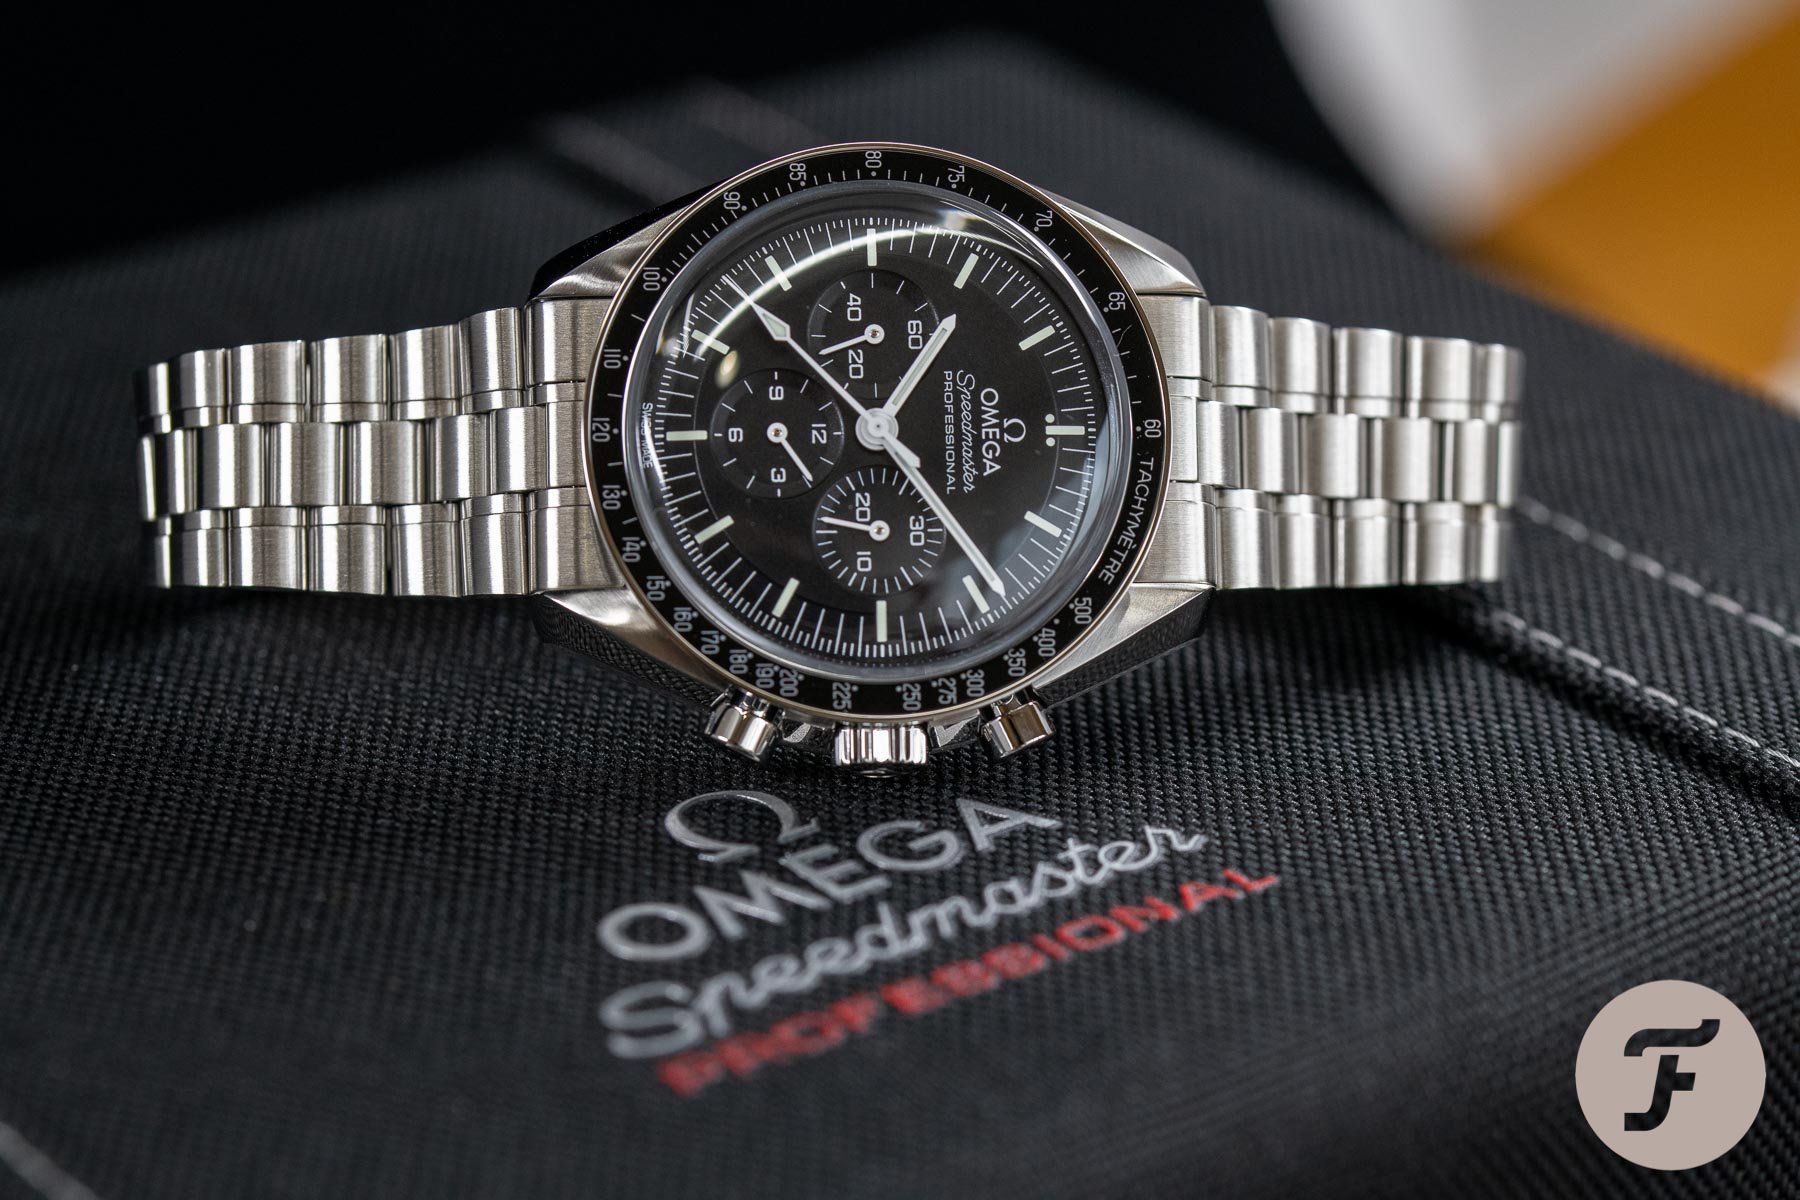 Omega's Pivotal New Pieces: Making its Mark as an Haute Horlogerie